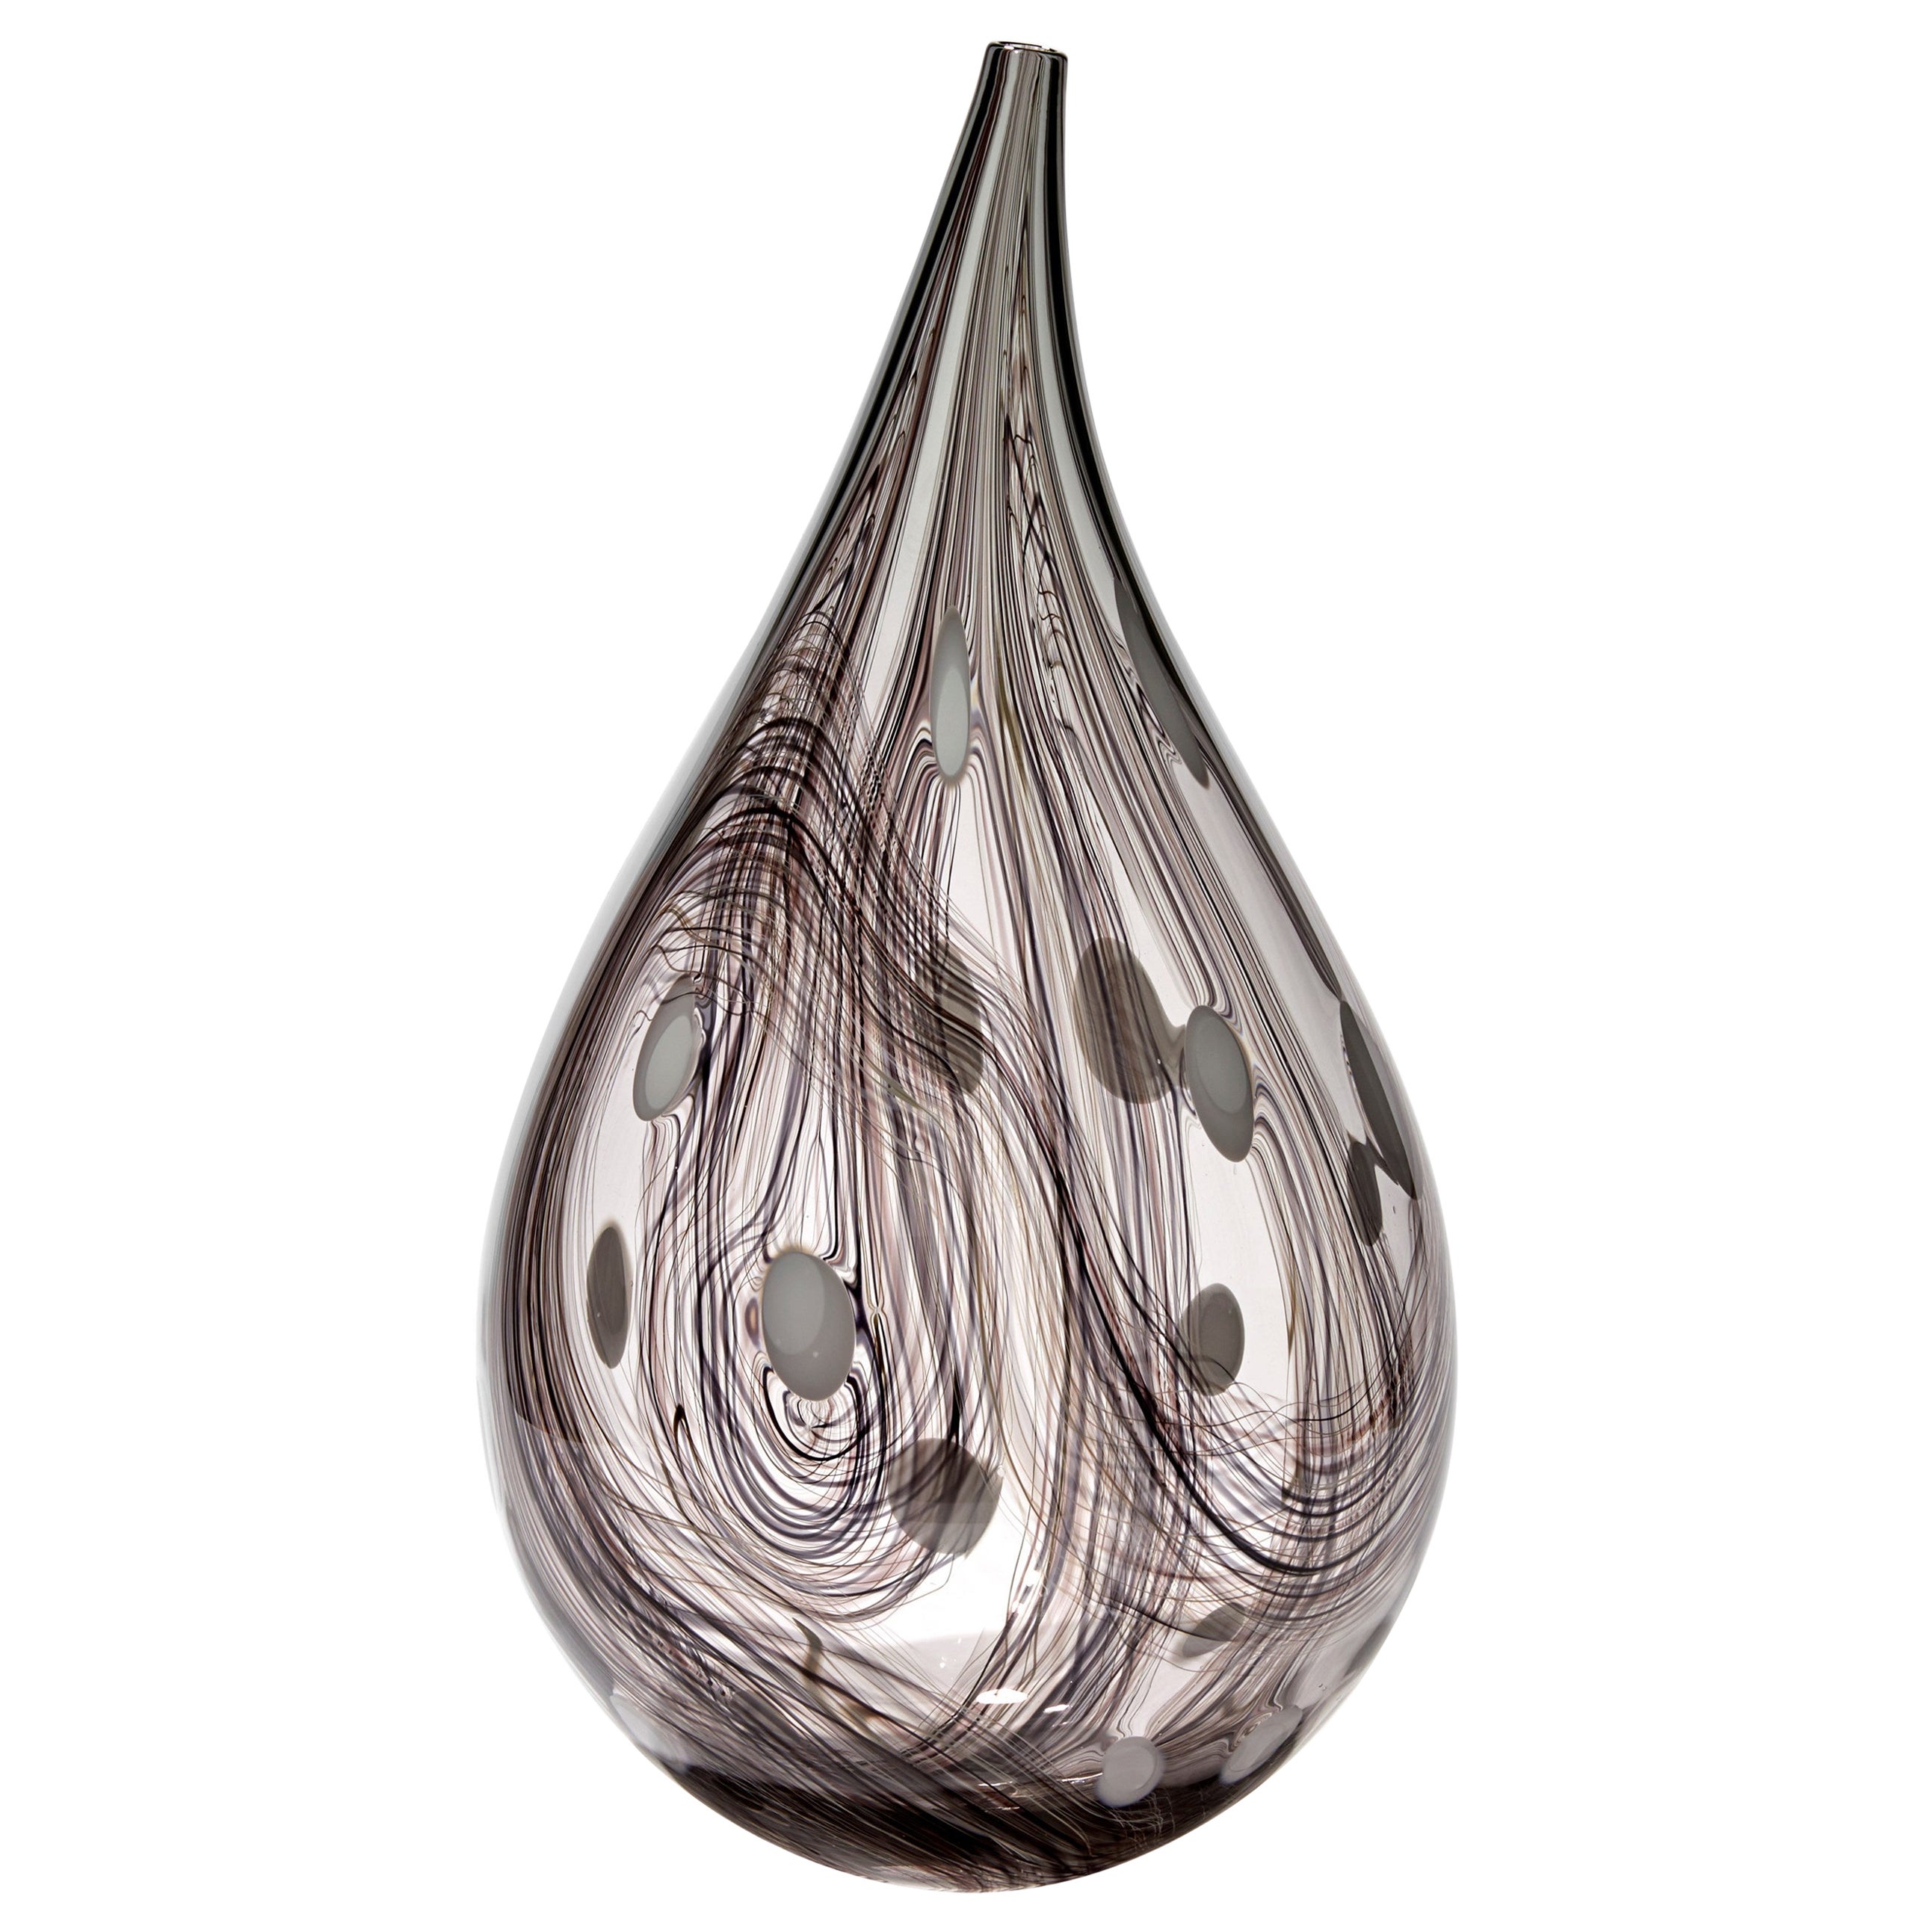 Threads iii, a White, Clear & Dark Purple Abstract Glass Vessel by Ann Wåhlström For Sale